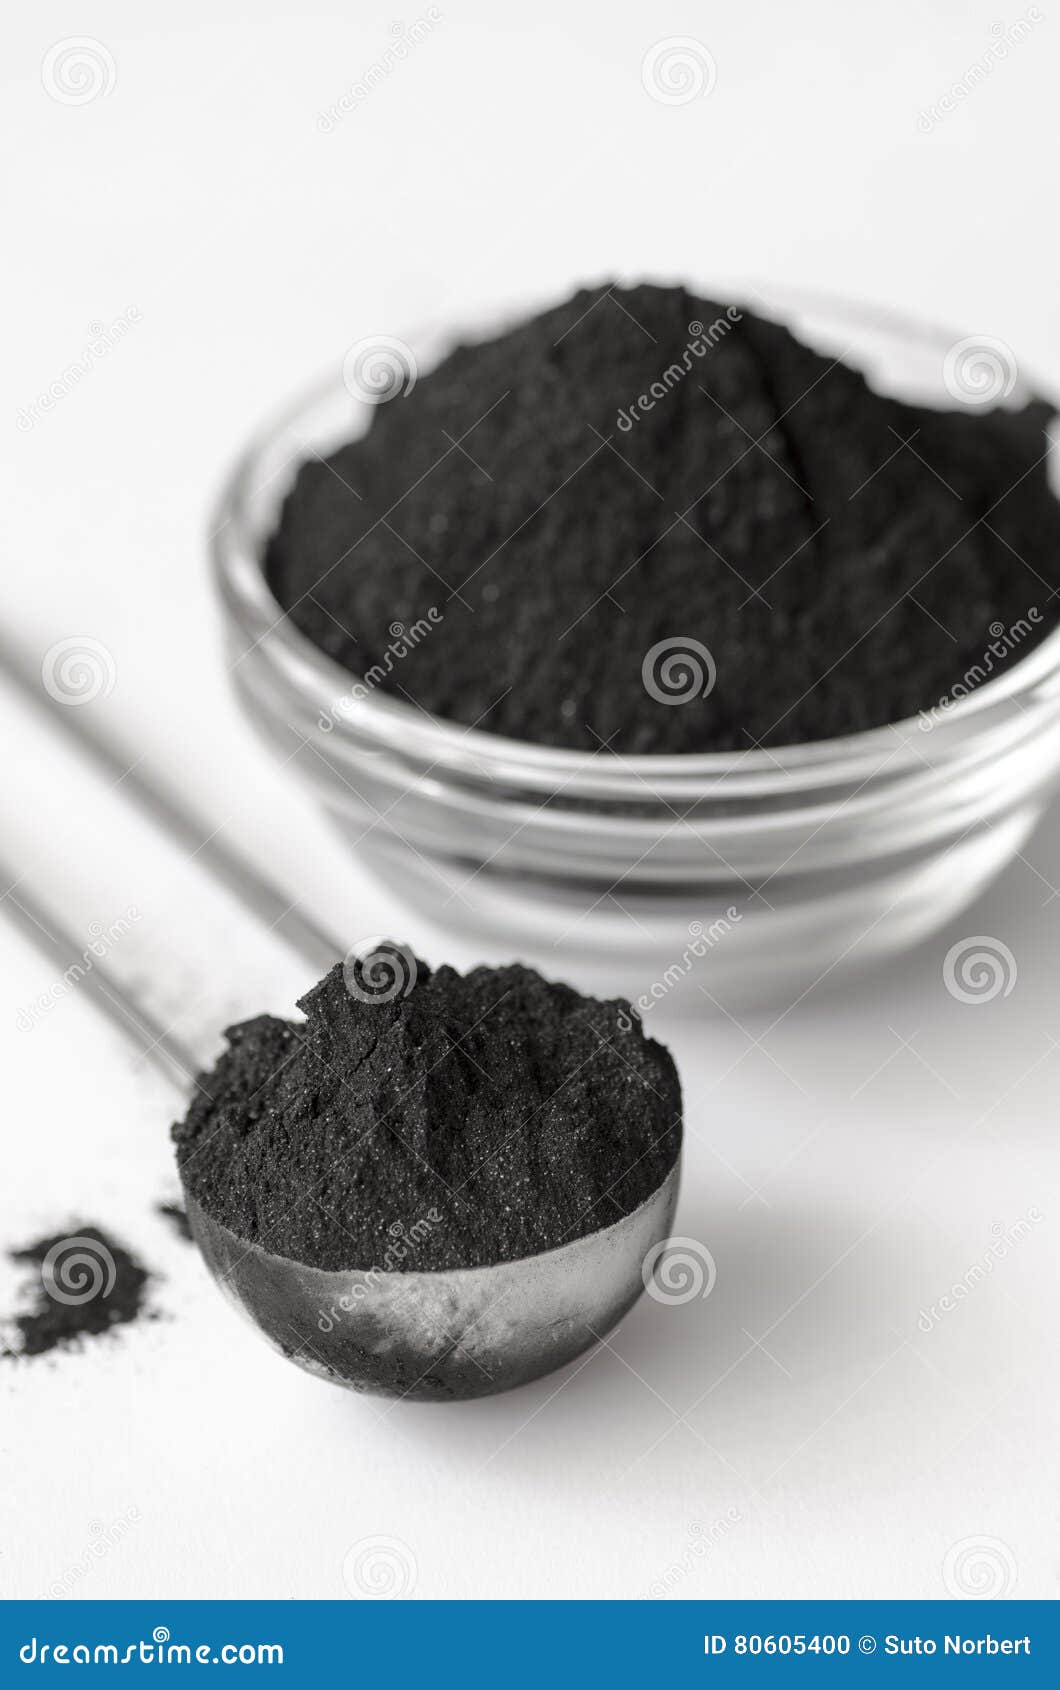 activated charcoal powder